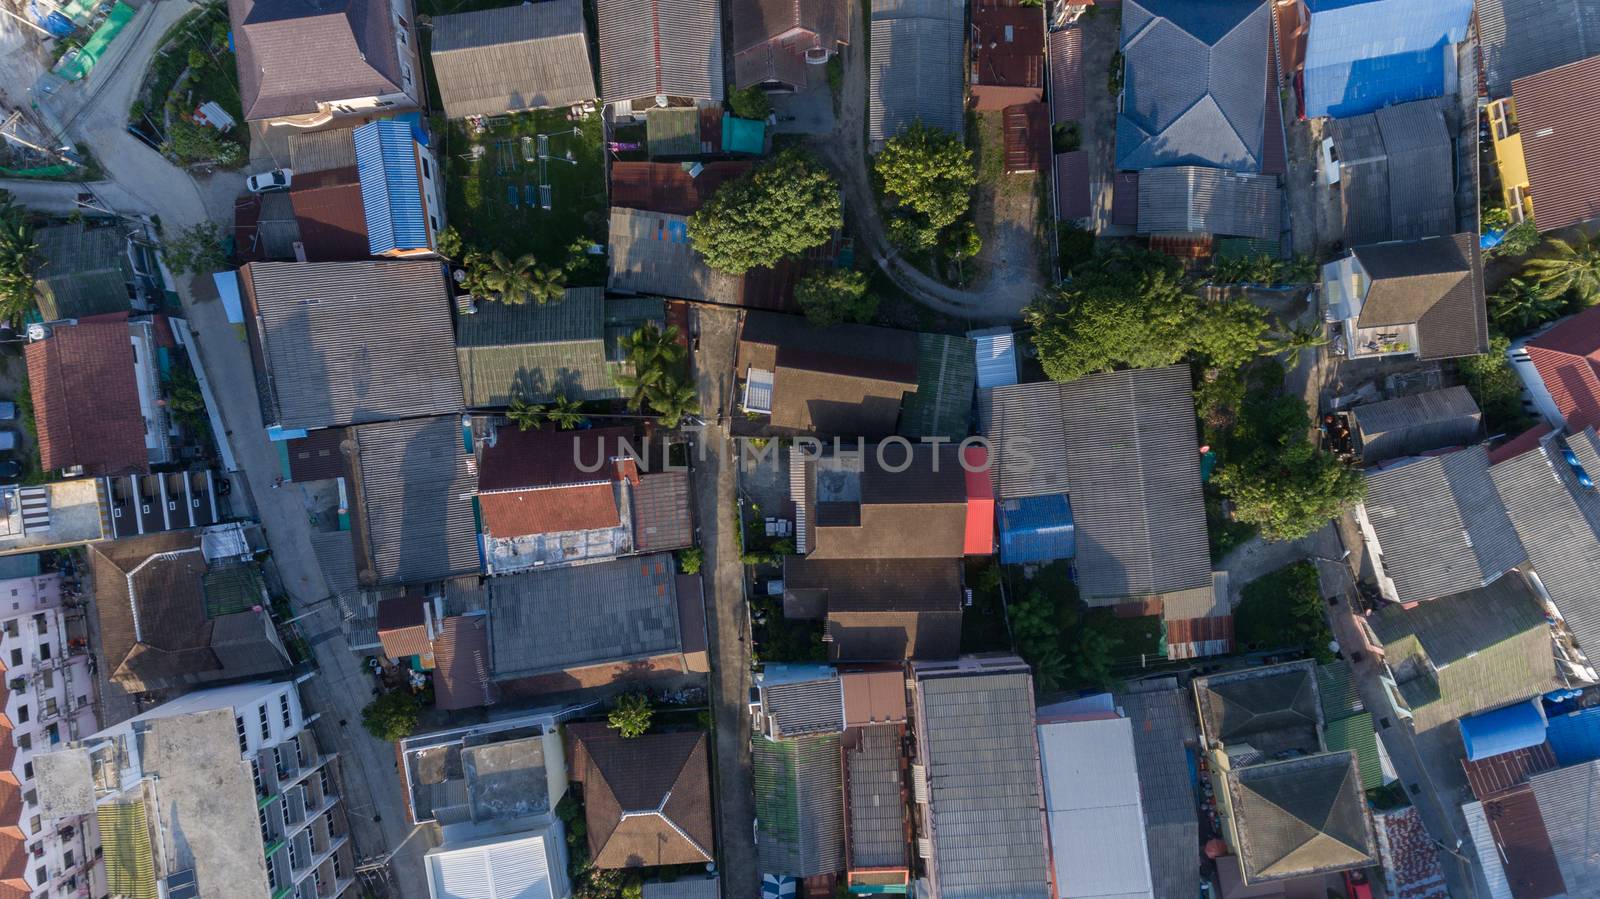 Aerial view of Thai village in South of Thailand by wyoosumran